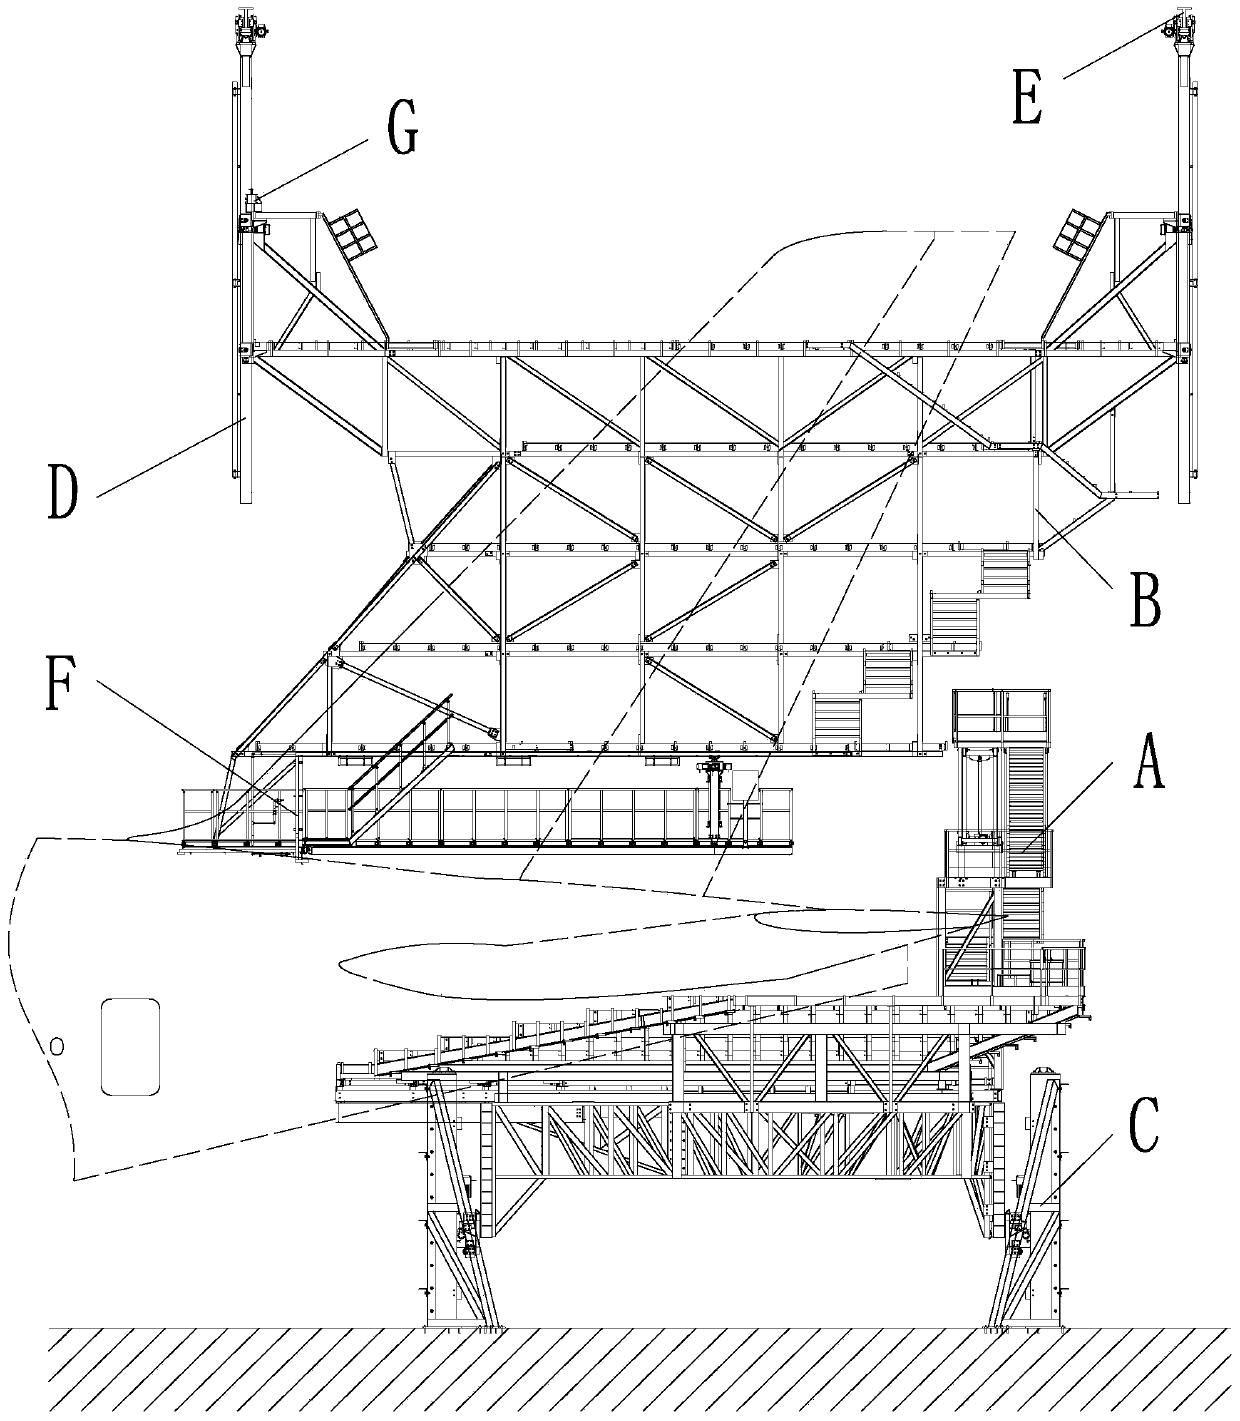 Aircraft repair dock used for repairing aircraft empennages